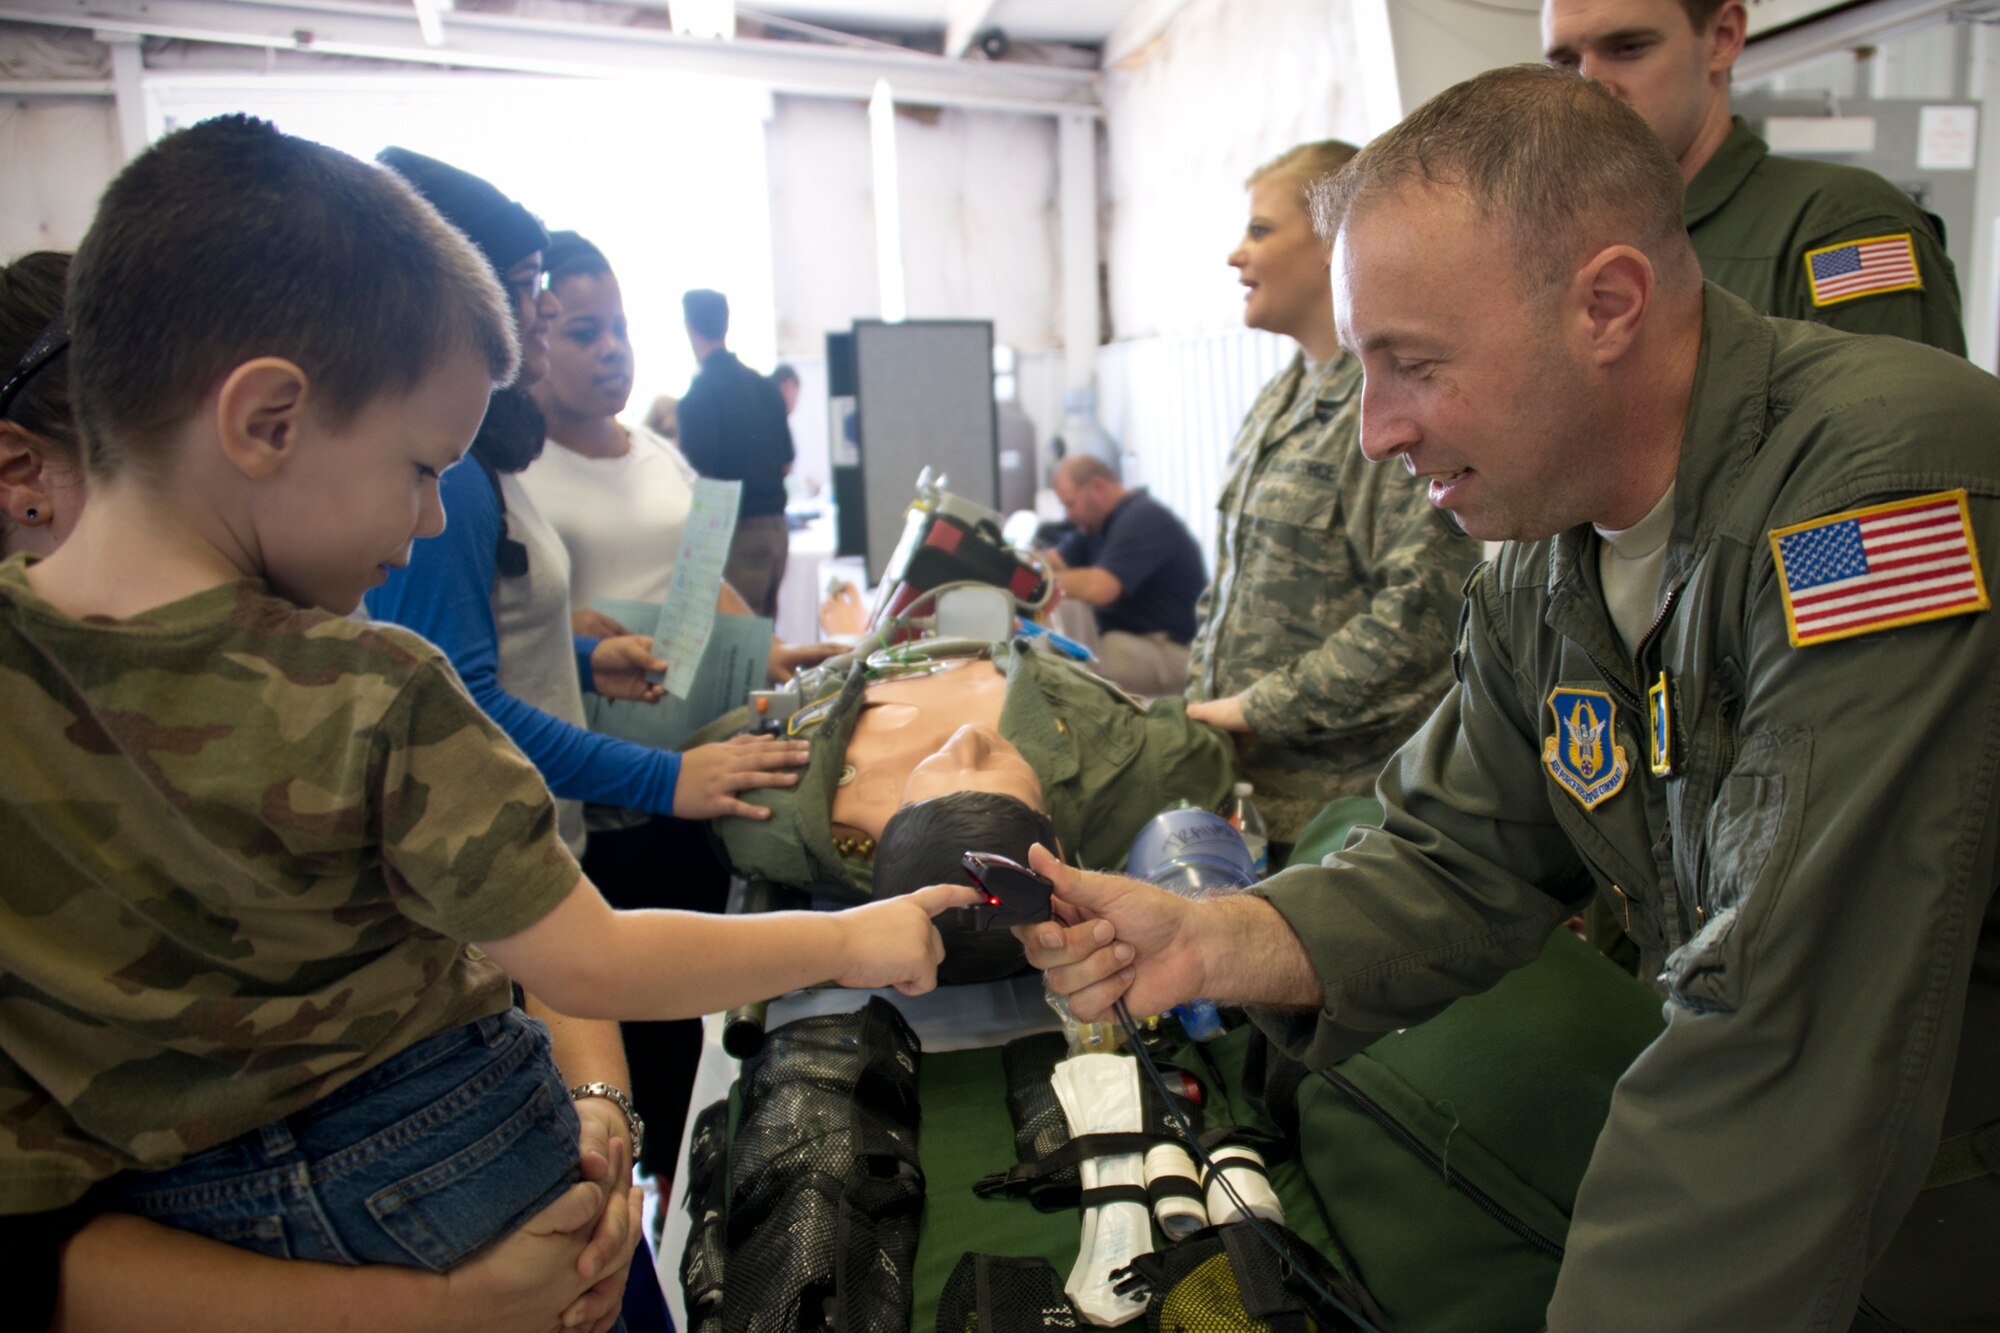 Margaret Kohlbecker's son, David (left), puts his finger in a pulse oximeter held by Tech Sgt. Carl Stewart II, 459th Aeromedical Evacuation Squadron aeromedical evacuation technician (right), at the Virginia Department of Transportation Career Fair at Prince William County Fairgrounds Oct. 8, 2015. The event, which drew more than 1,300 students from the Prince William County area, provided an opportunity for youths to learn about careers in the transportation industry. The 459th was on hand to discuss potential career paths as pilots, boom operators and inflight medics. (U.S. Air Force photo by Staff Sgt. Kat Justen)